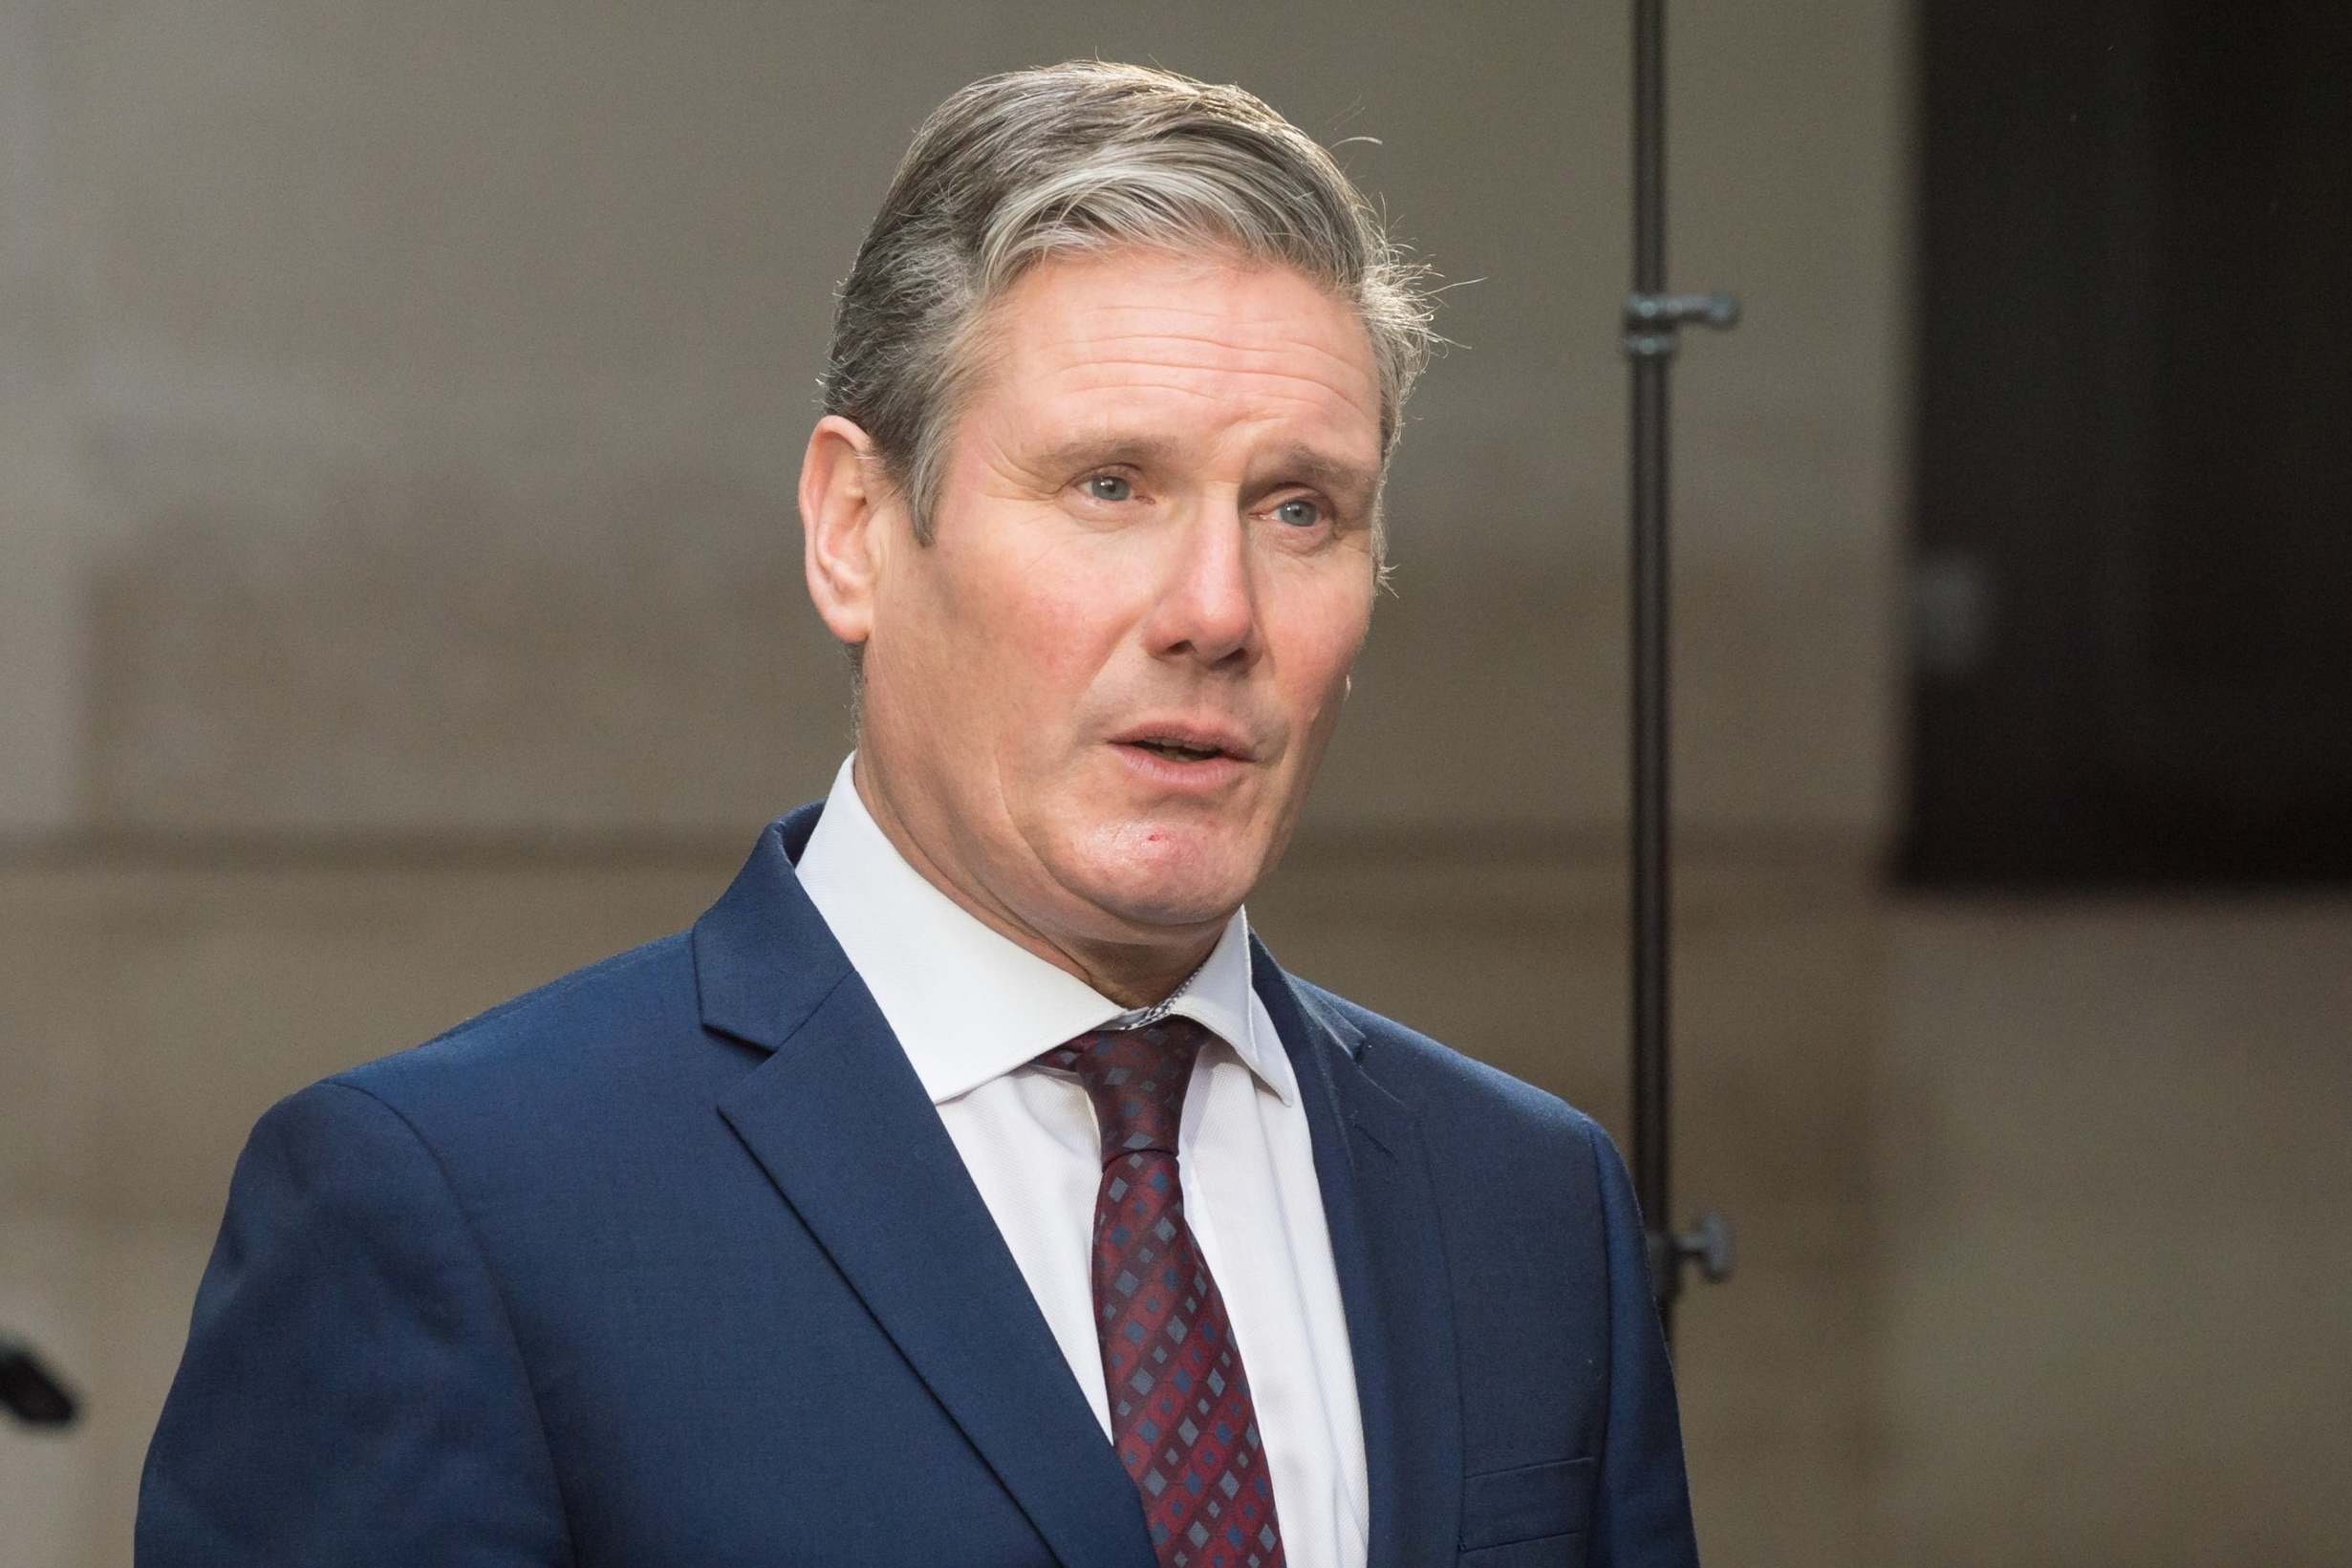 Keir Starmer called for party unity at his campaign launch (Barcroft Media via Getty)